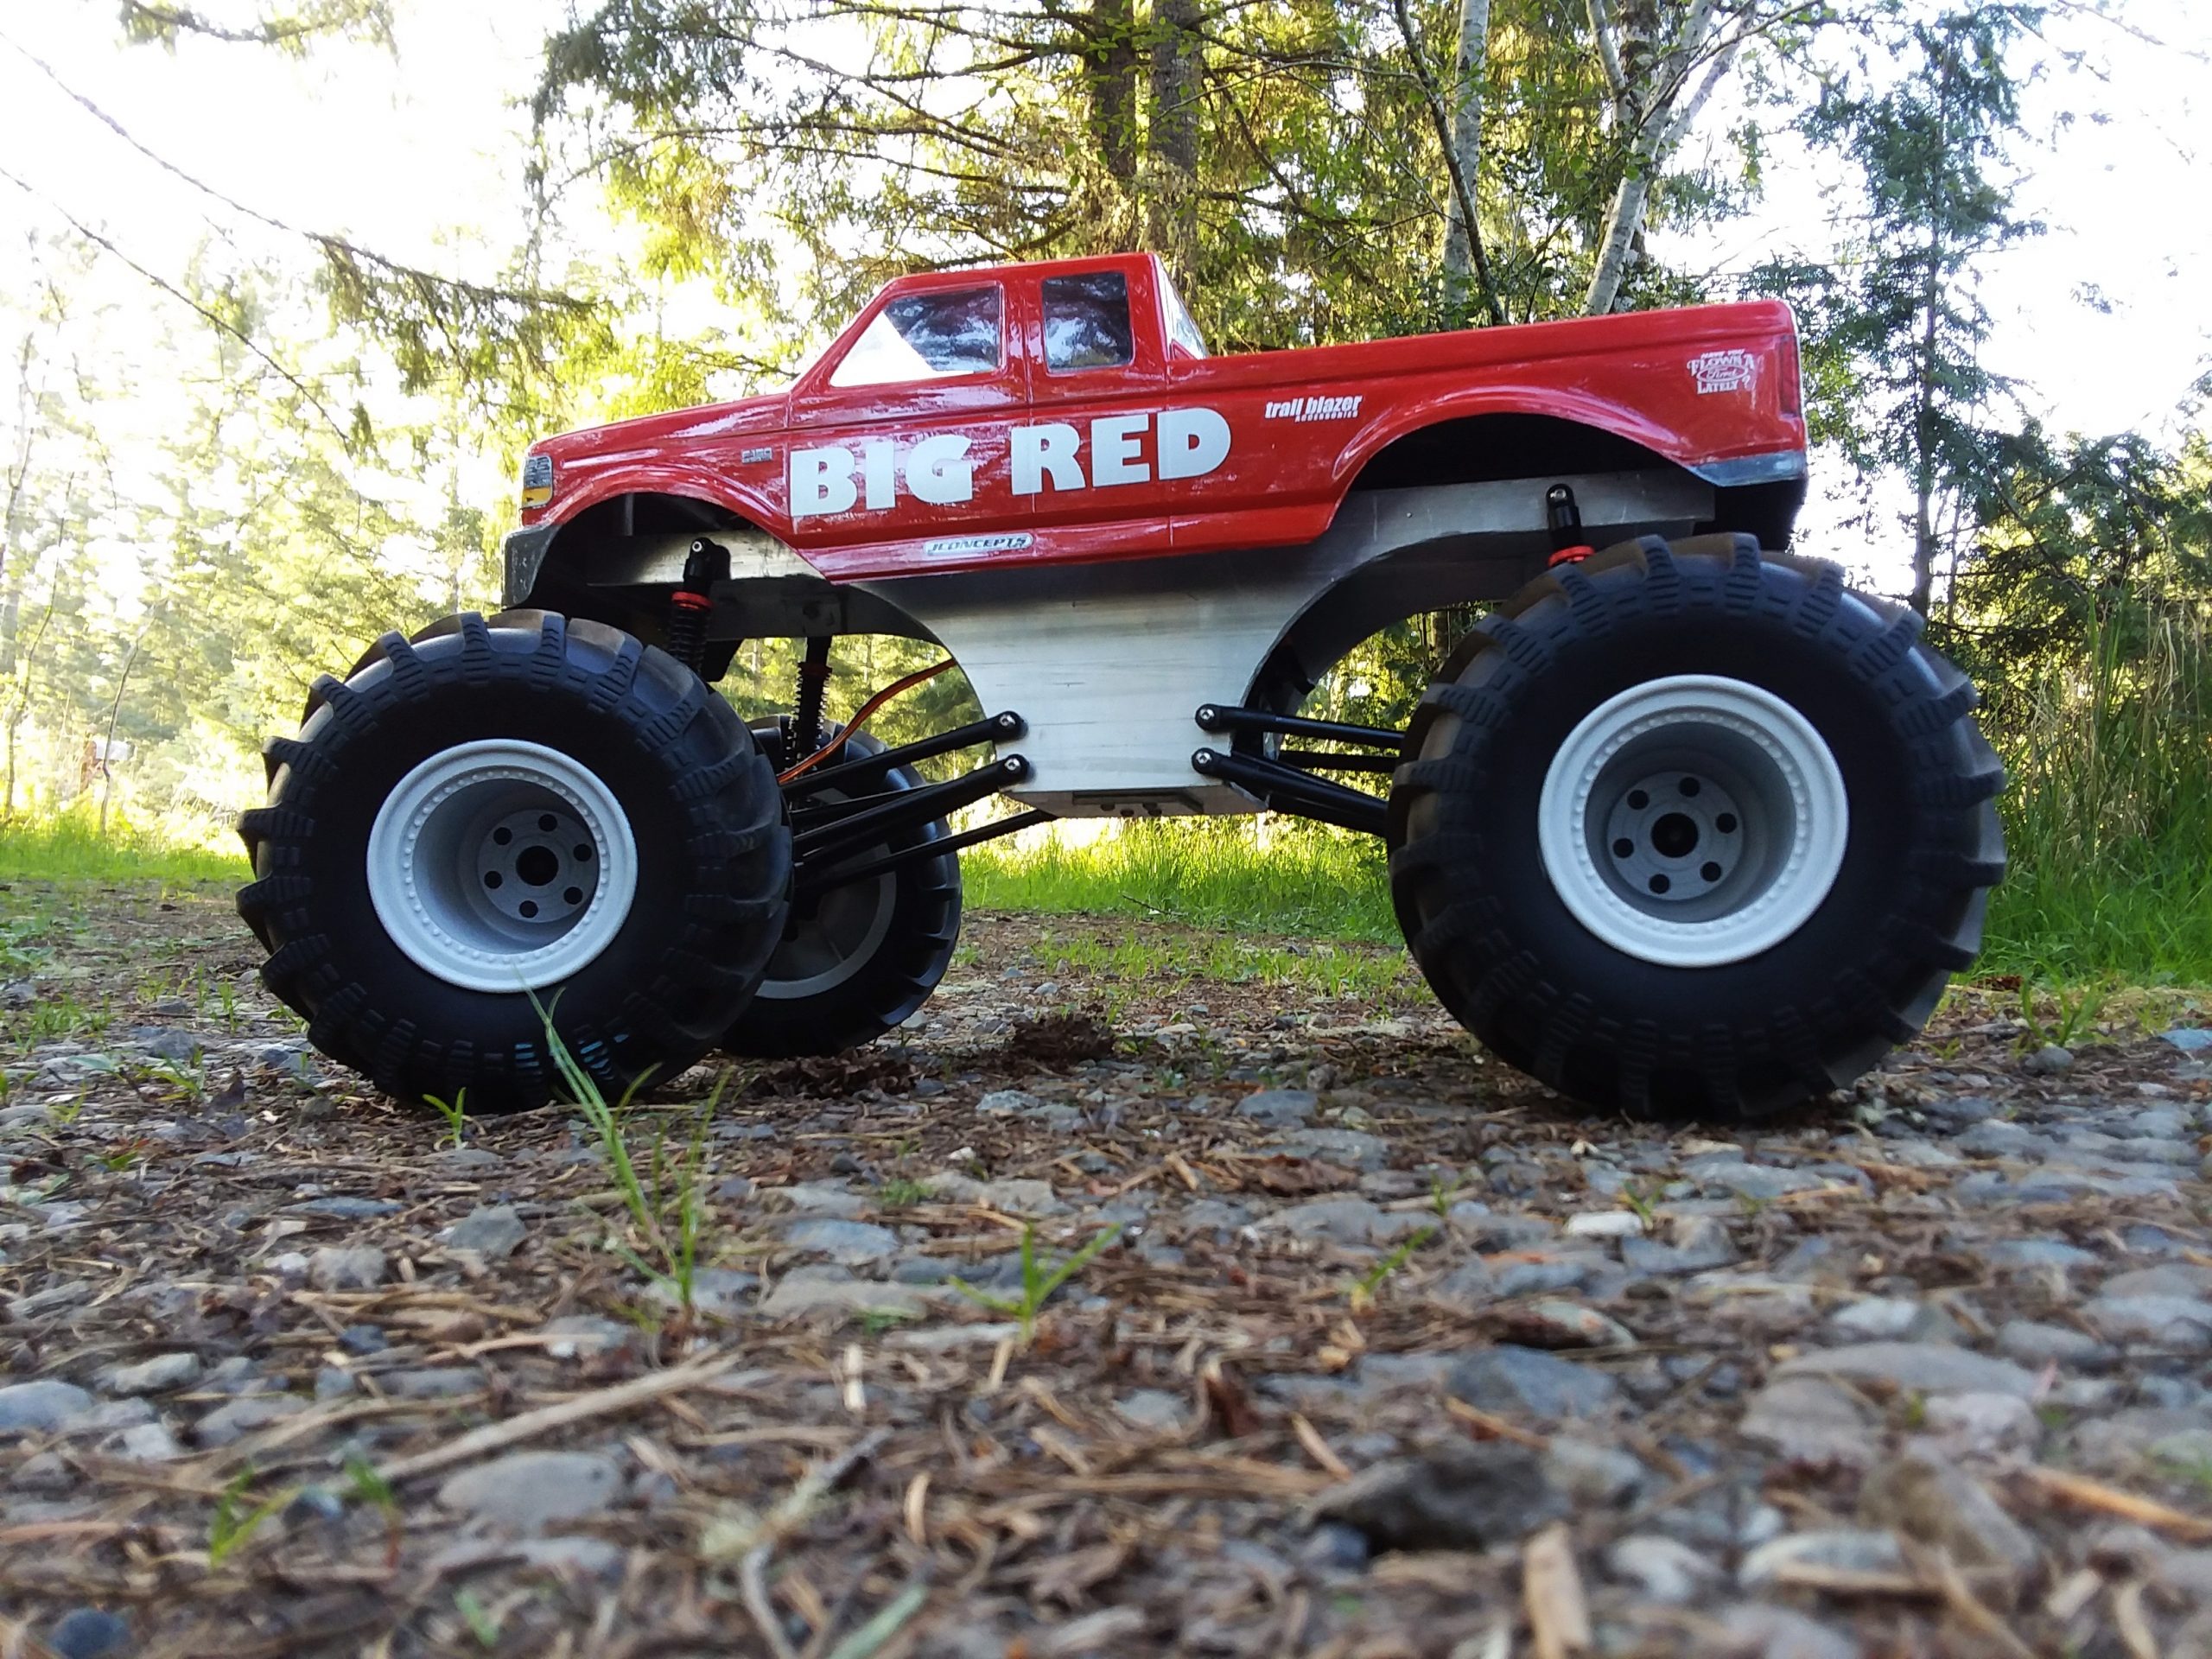 Big Red Monster build - RC Car Action